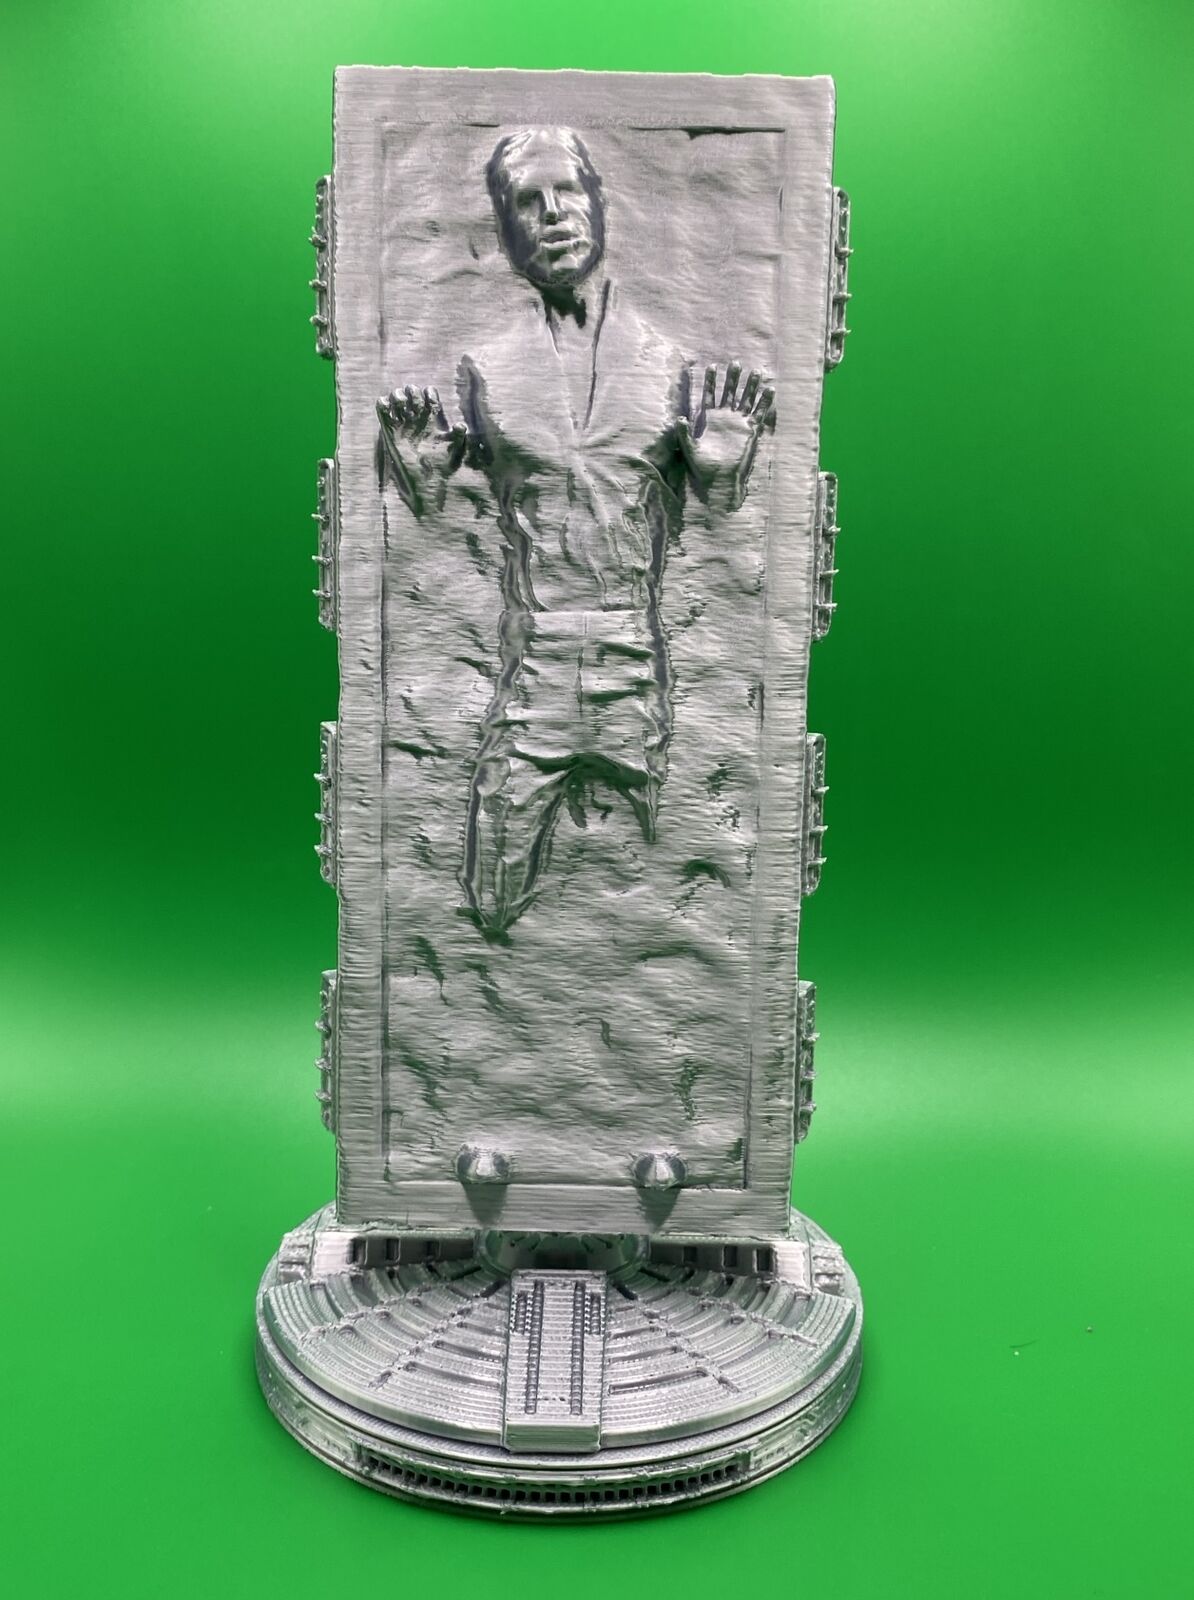 Han Solo in Carbonite 3D Printed Star Wars | Plastic Filament | 7 Inches Tall